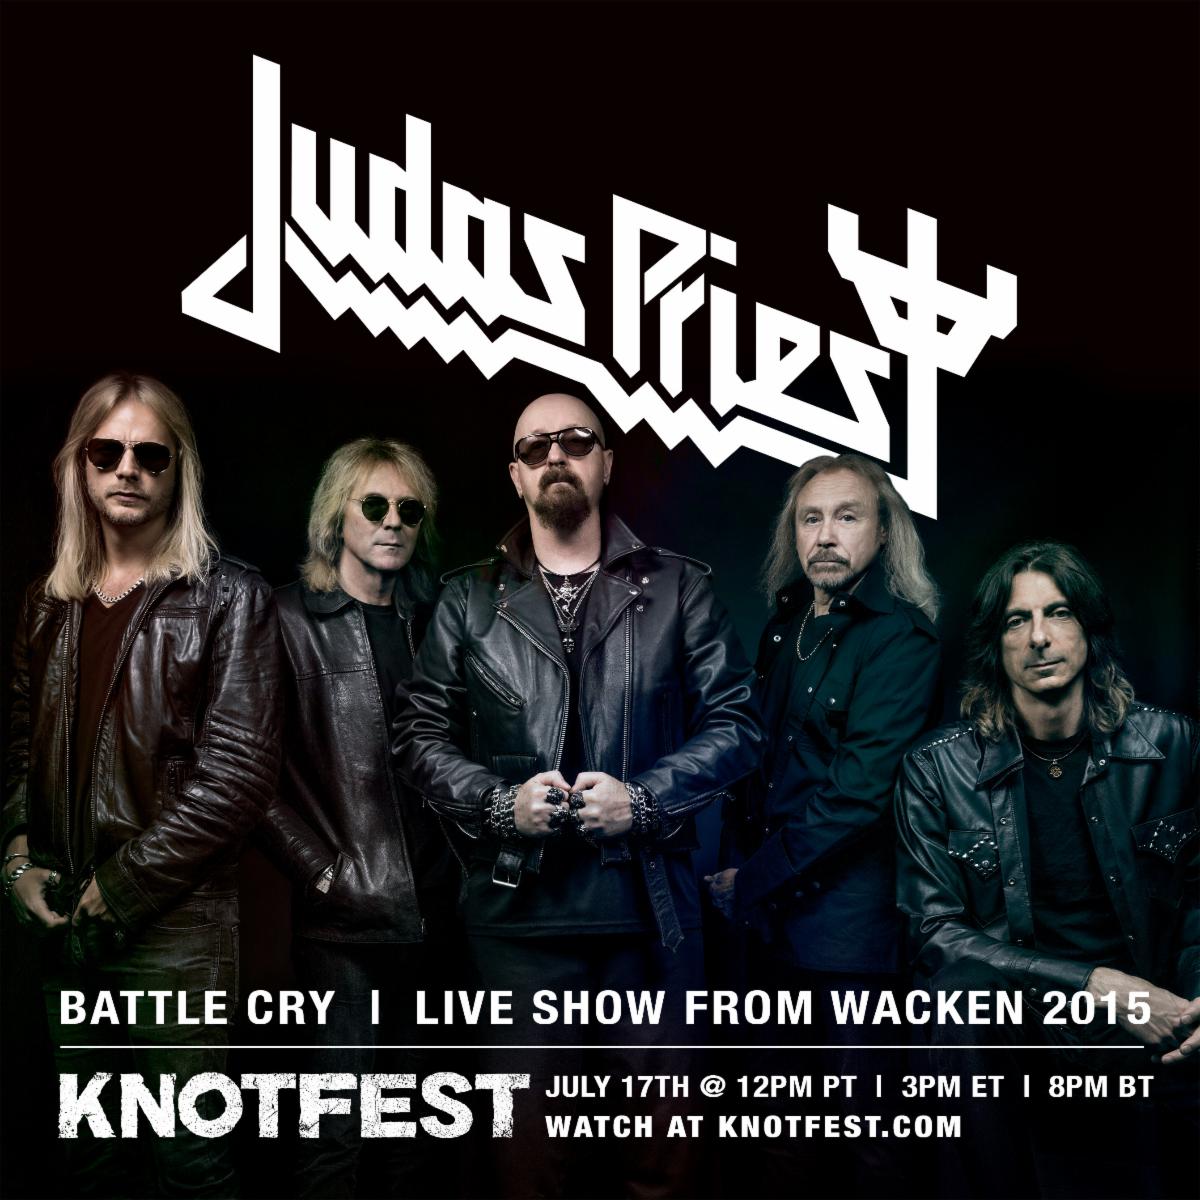 Knotfest.com Announce Concert Streams From Jinjer And Judas Priest